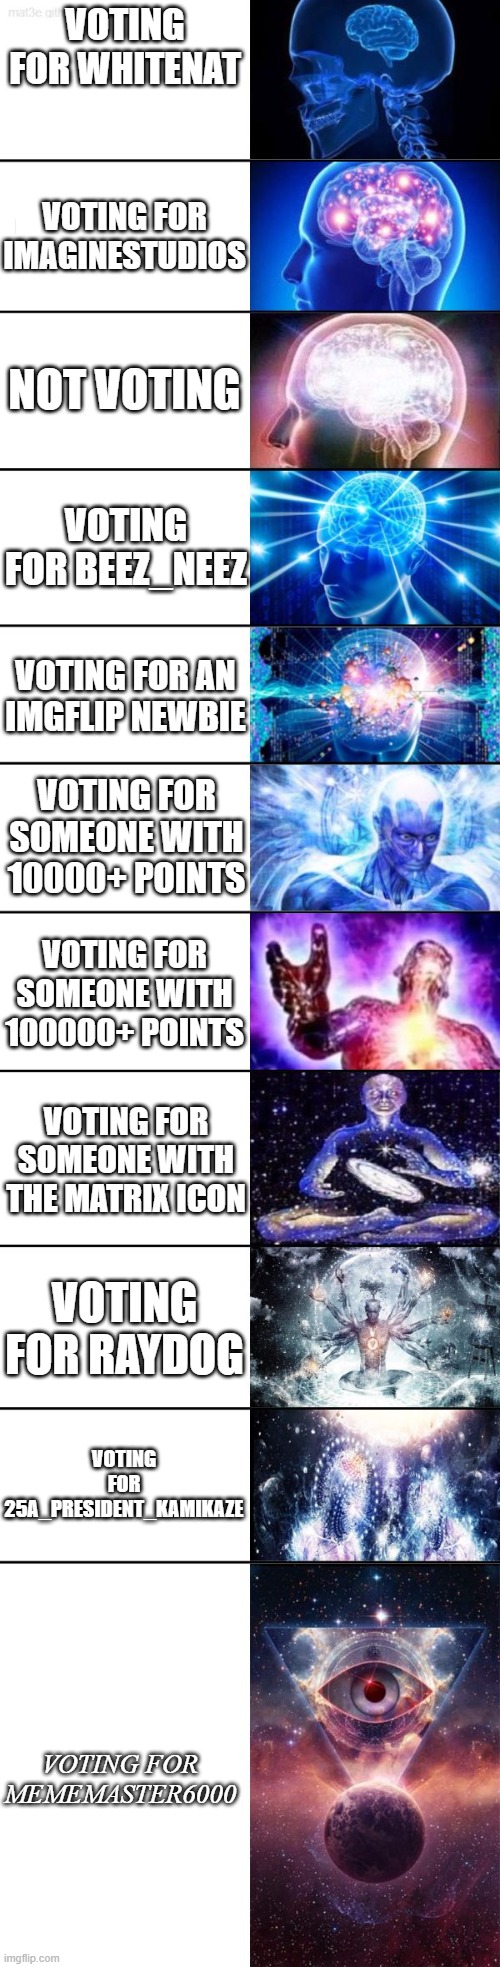 Vote 4 me and my 7 golden promises! | VOTING FOR WHITENAT; VOTING FOR IMAGINESTUDIOS; NOT VOTING; VOTING FOR BEEZ_NEEZ; VOTING FOR AN IMGFLIP NEWBIE; VOTING FOR SOMEONE WITH 10000+ POINTS; VOTING FOR SOMEONE WITH 100000+ POINTS; VOTING FOR SOMEONE WITH THE MATRIX ICON; VOTING FOR RAYDOG; VOTING FOR 25A_PRESIDENT_KAMIKAZE; VOTING FOR MEMEMASTER6000 | image tagged in extended expanding brain,vote 4 me,u will not regret it | made w/ Imgflip meme maker